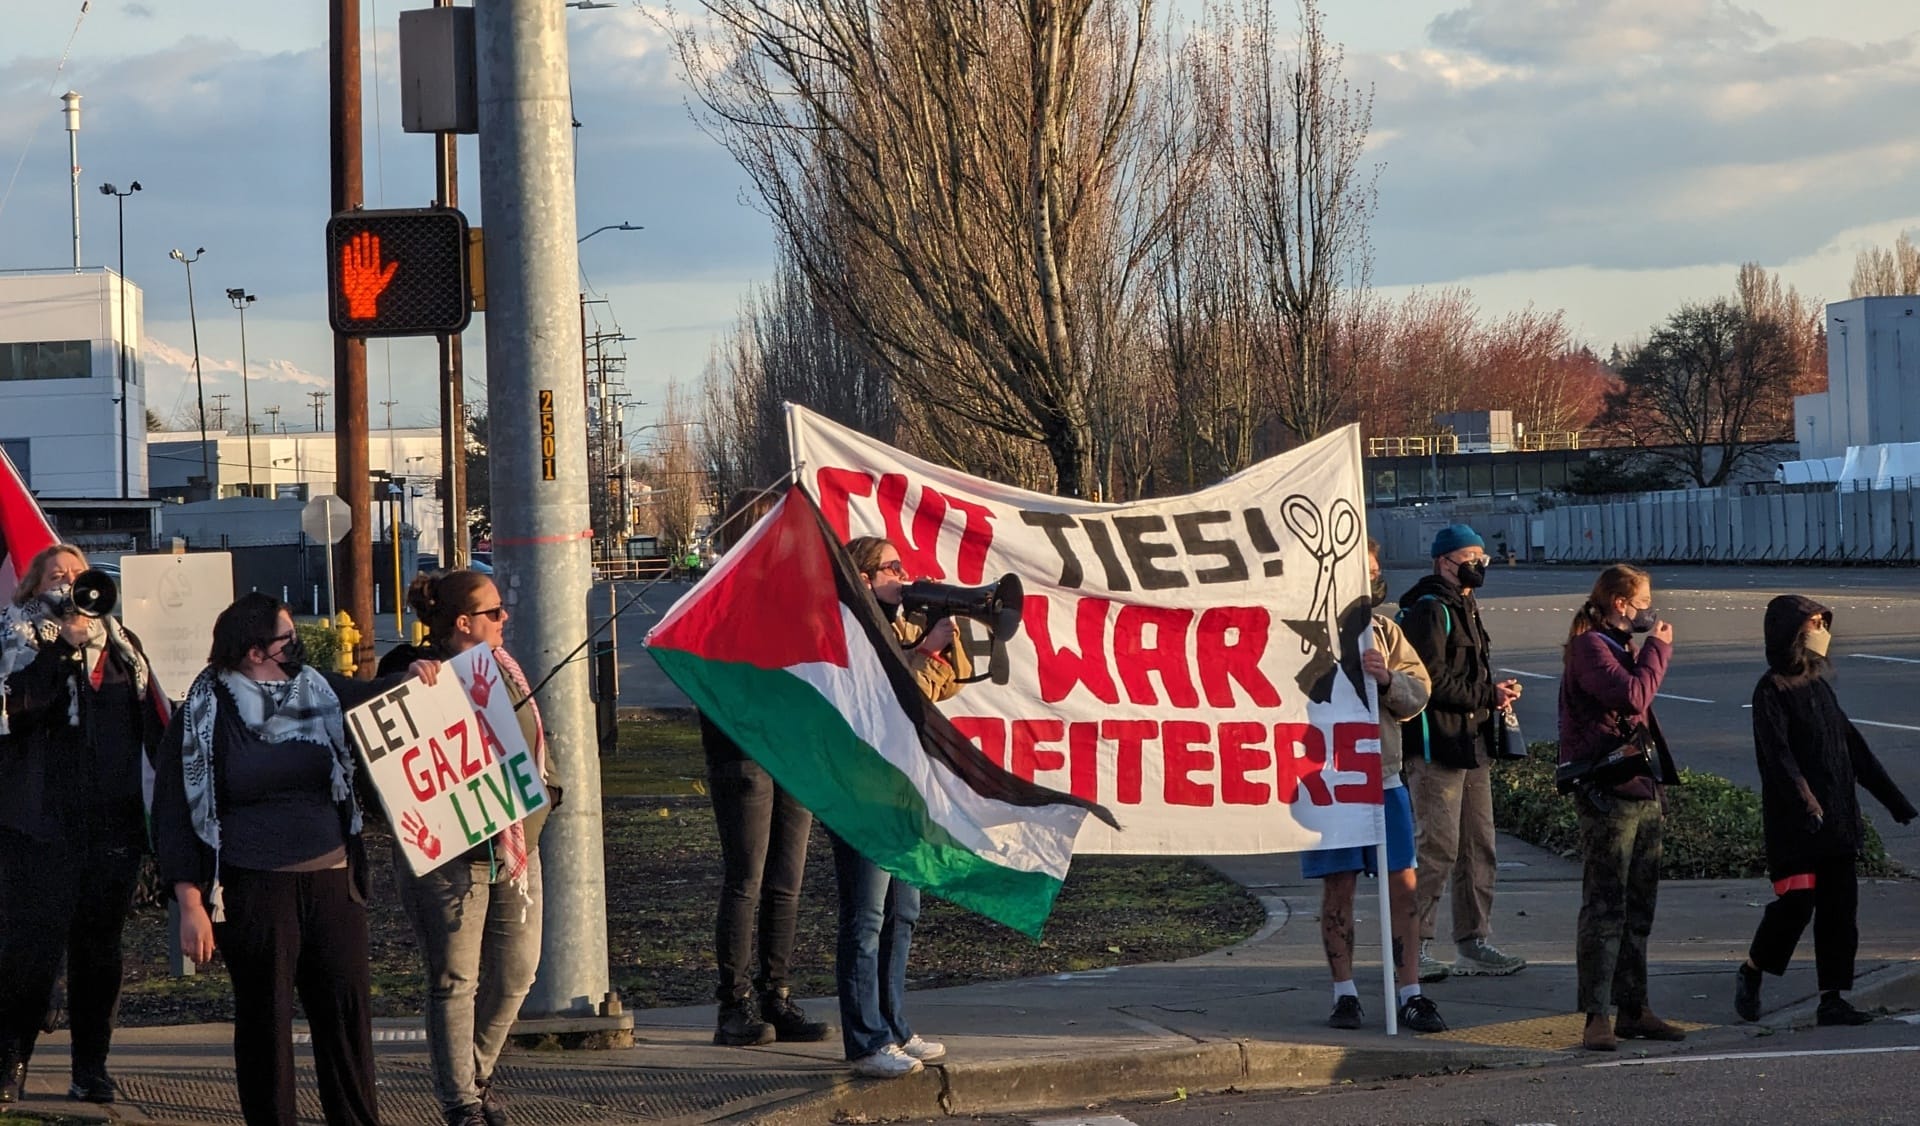 protesters hold signs, Palestine flag